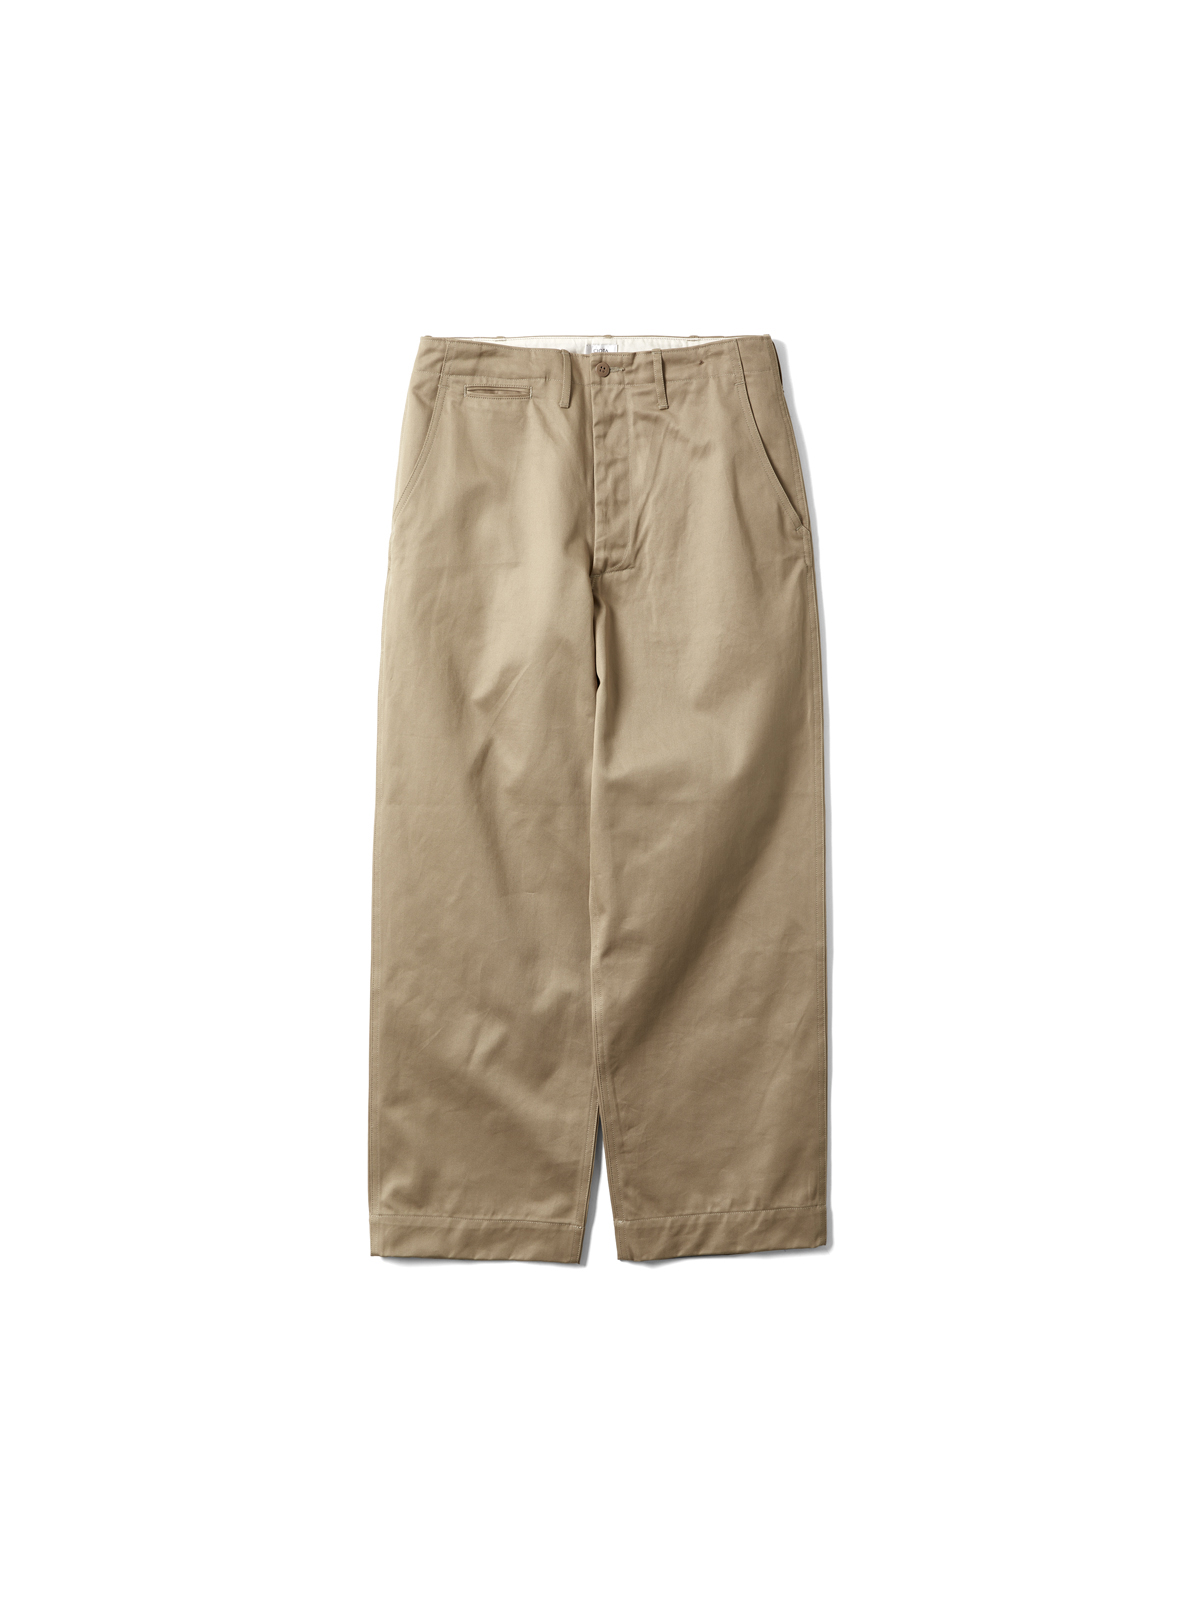 WEAPON CHINO CLOTH PANTS (BEIGE)